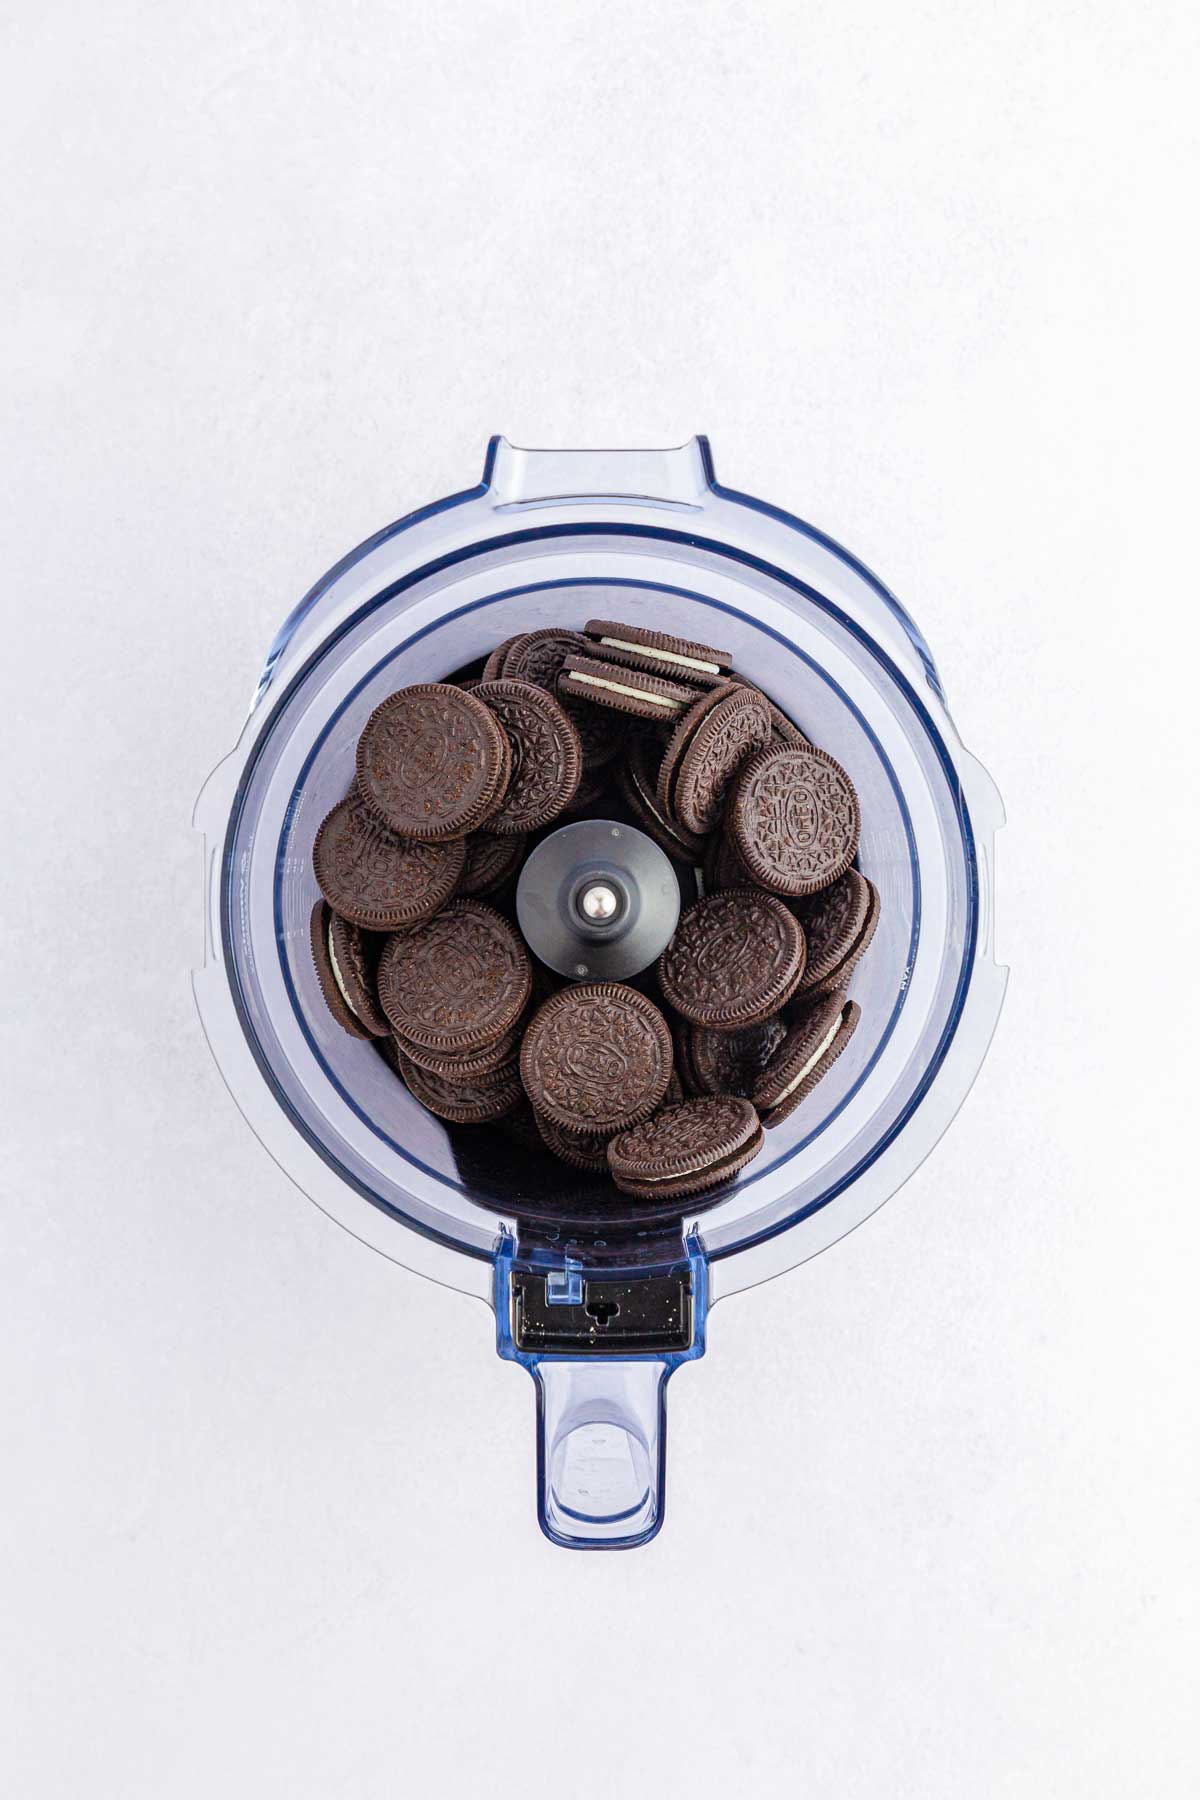 One process of preparing Easter dirt cups is to put the Oreos in the food processor